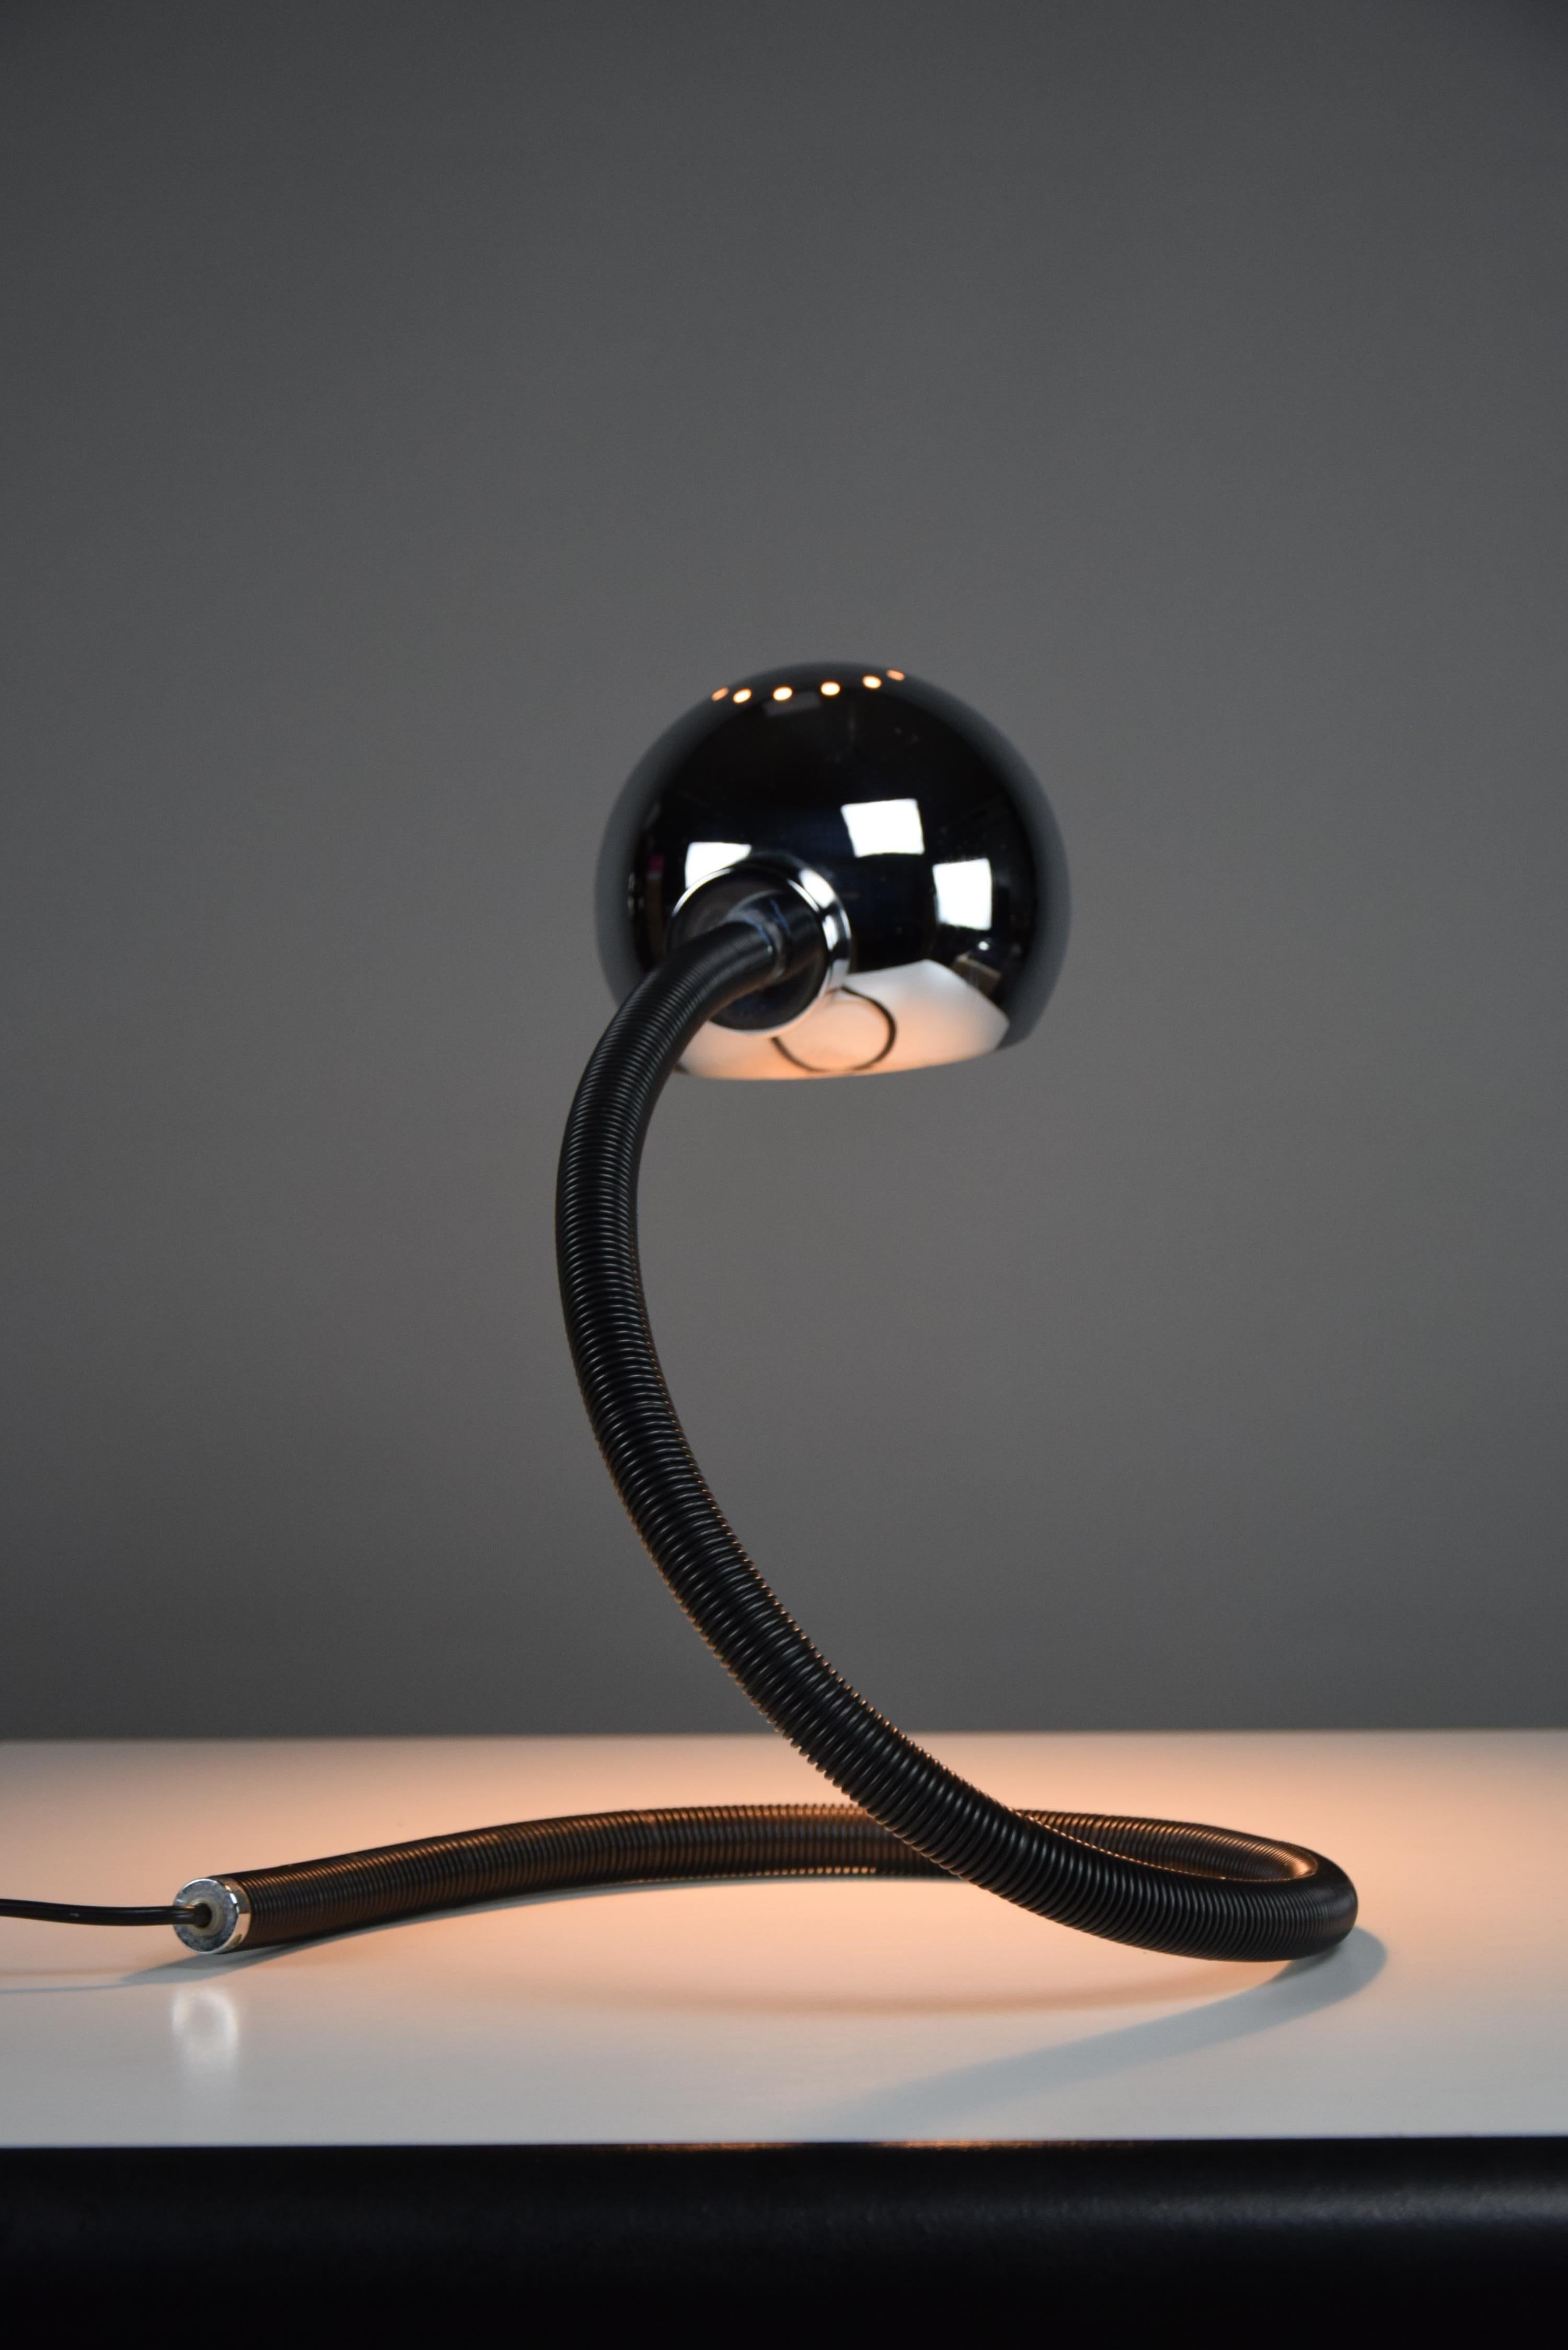 Introducing the timeless elegance of the Hebi table lamp, a masterpiece of design by Isao Hosoe for Valenti Luce in the 1970s. With its iconic large black adjustable and flexible frame, the Hebi lamp effortlessly blends form and function. Illuminate